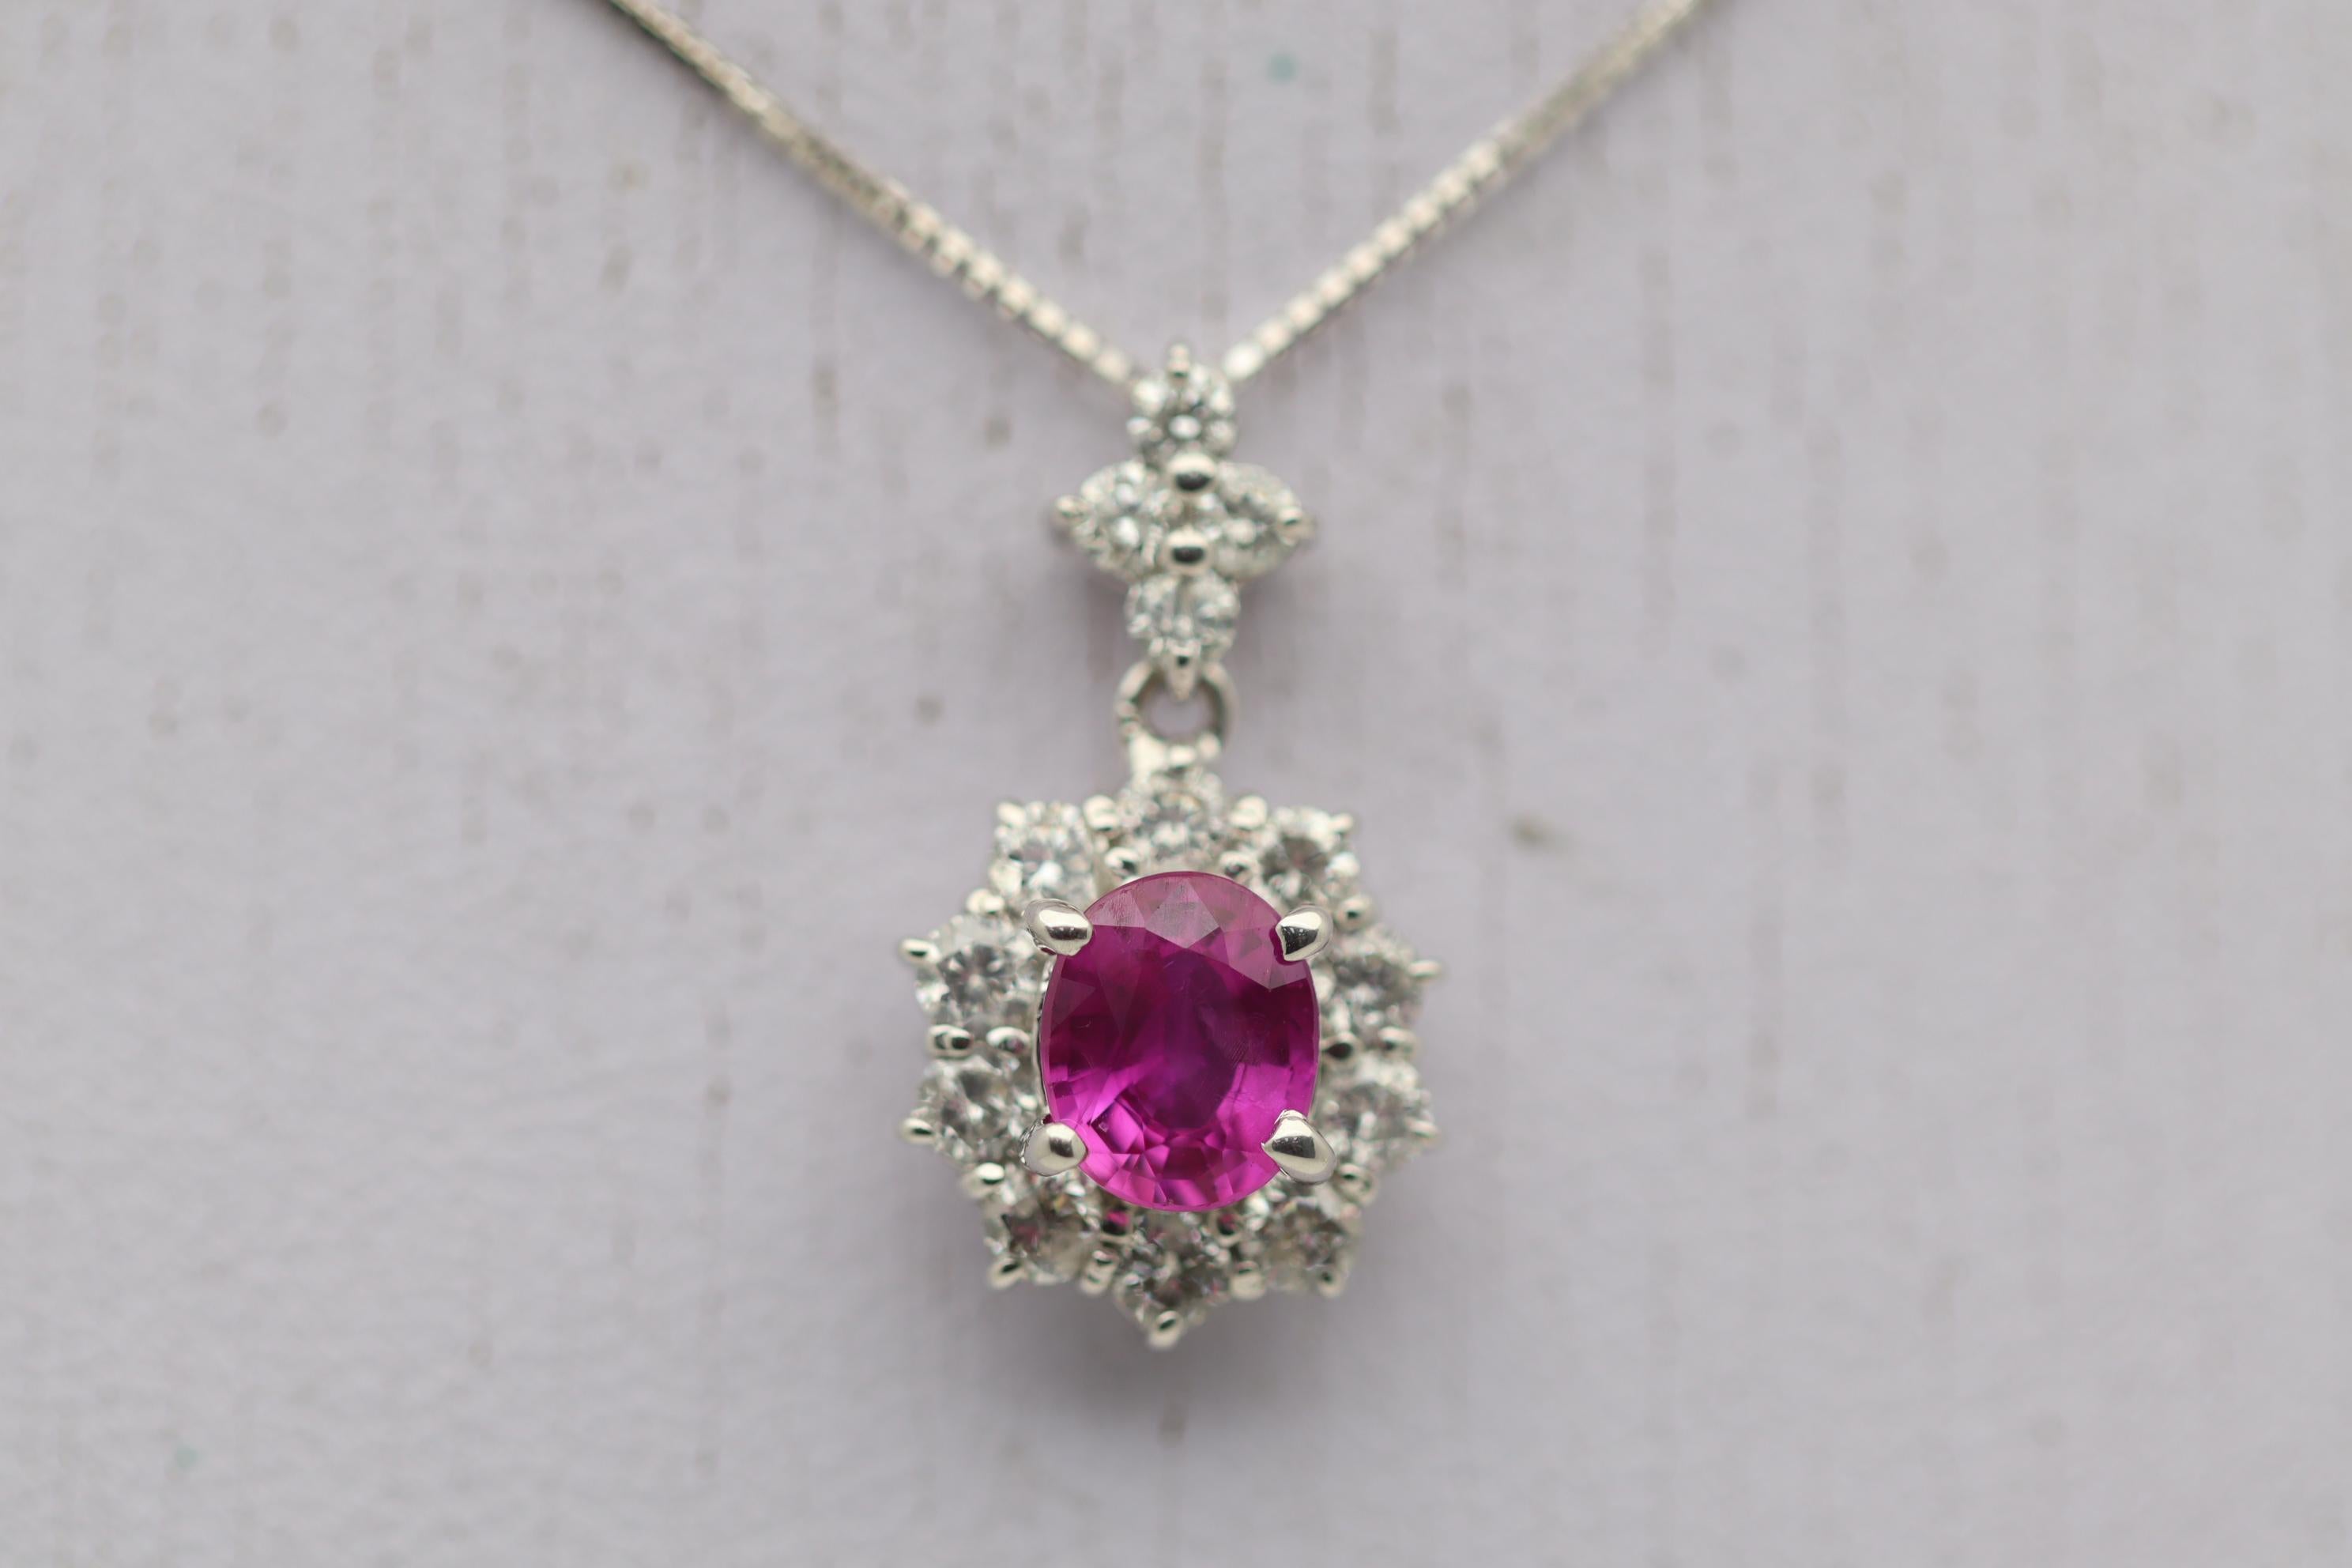 A lovely intense reddish-pink sapphire takes center stage! The color is so strong and vivid that some will consider this stone as a ruby. It weighs 1.09 carats and is oval shaped. Surrounding the sapphire is a halo of round brilliant-cut diamonds as